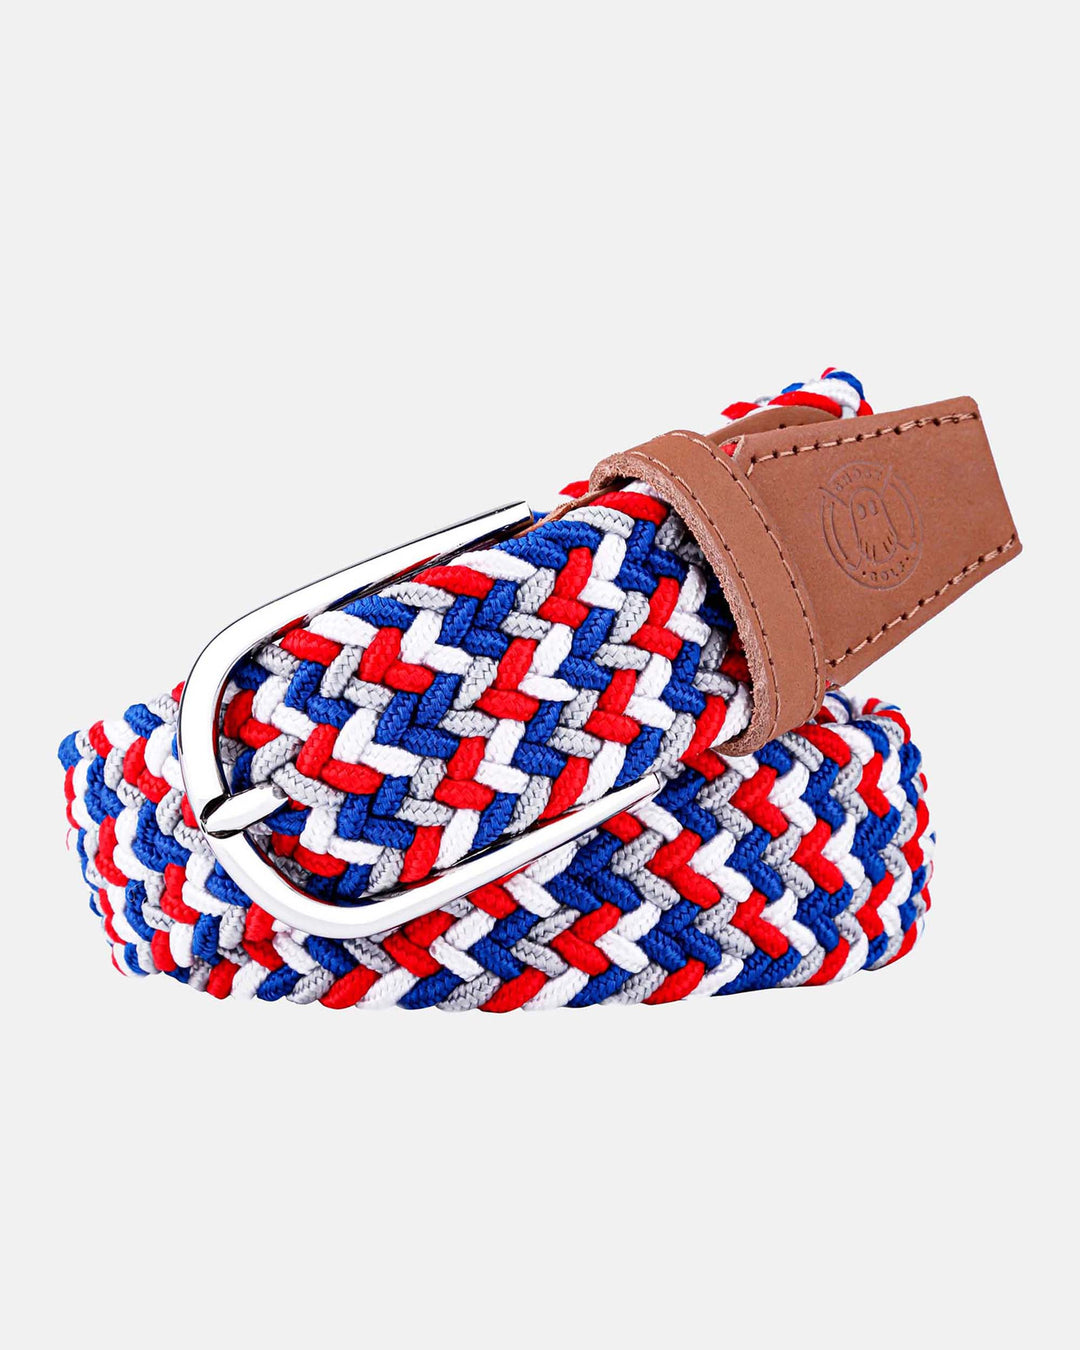 Ghost Golf Blue/Grey/White/Red Multi Color Belt with Rounded Steel Buckle and Tan Leather Tail 